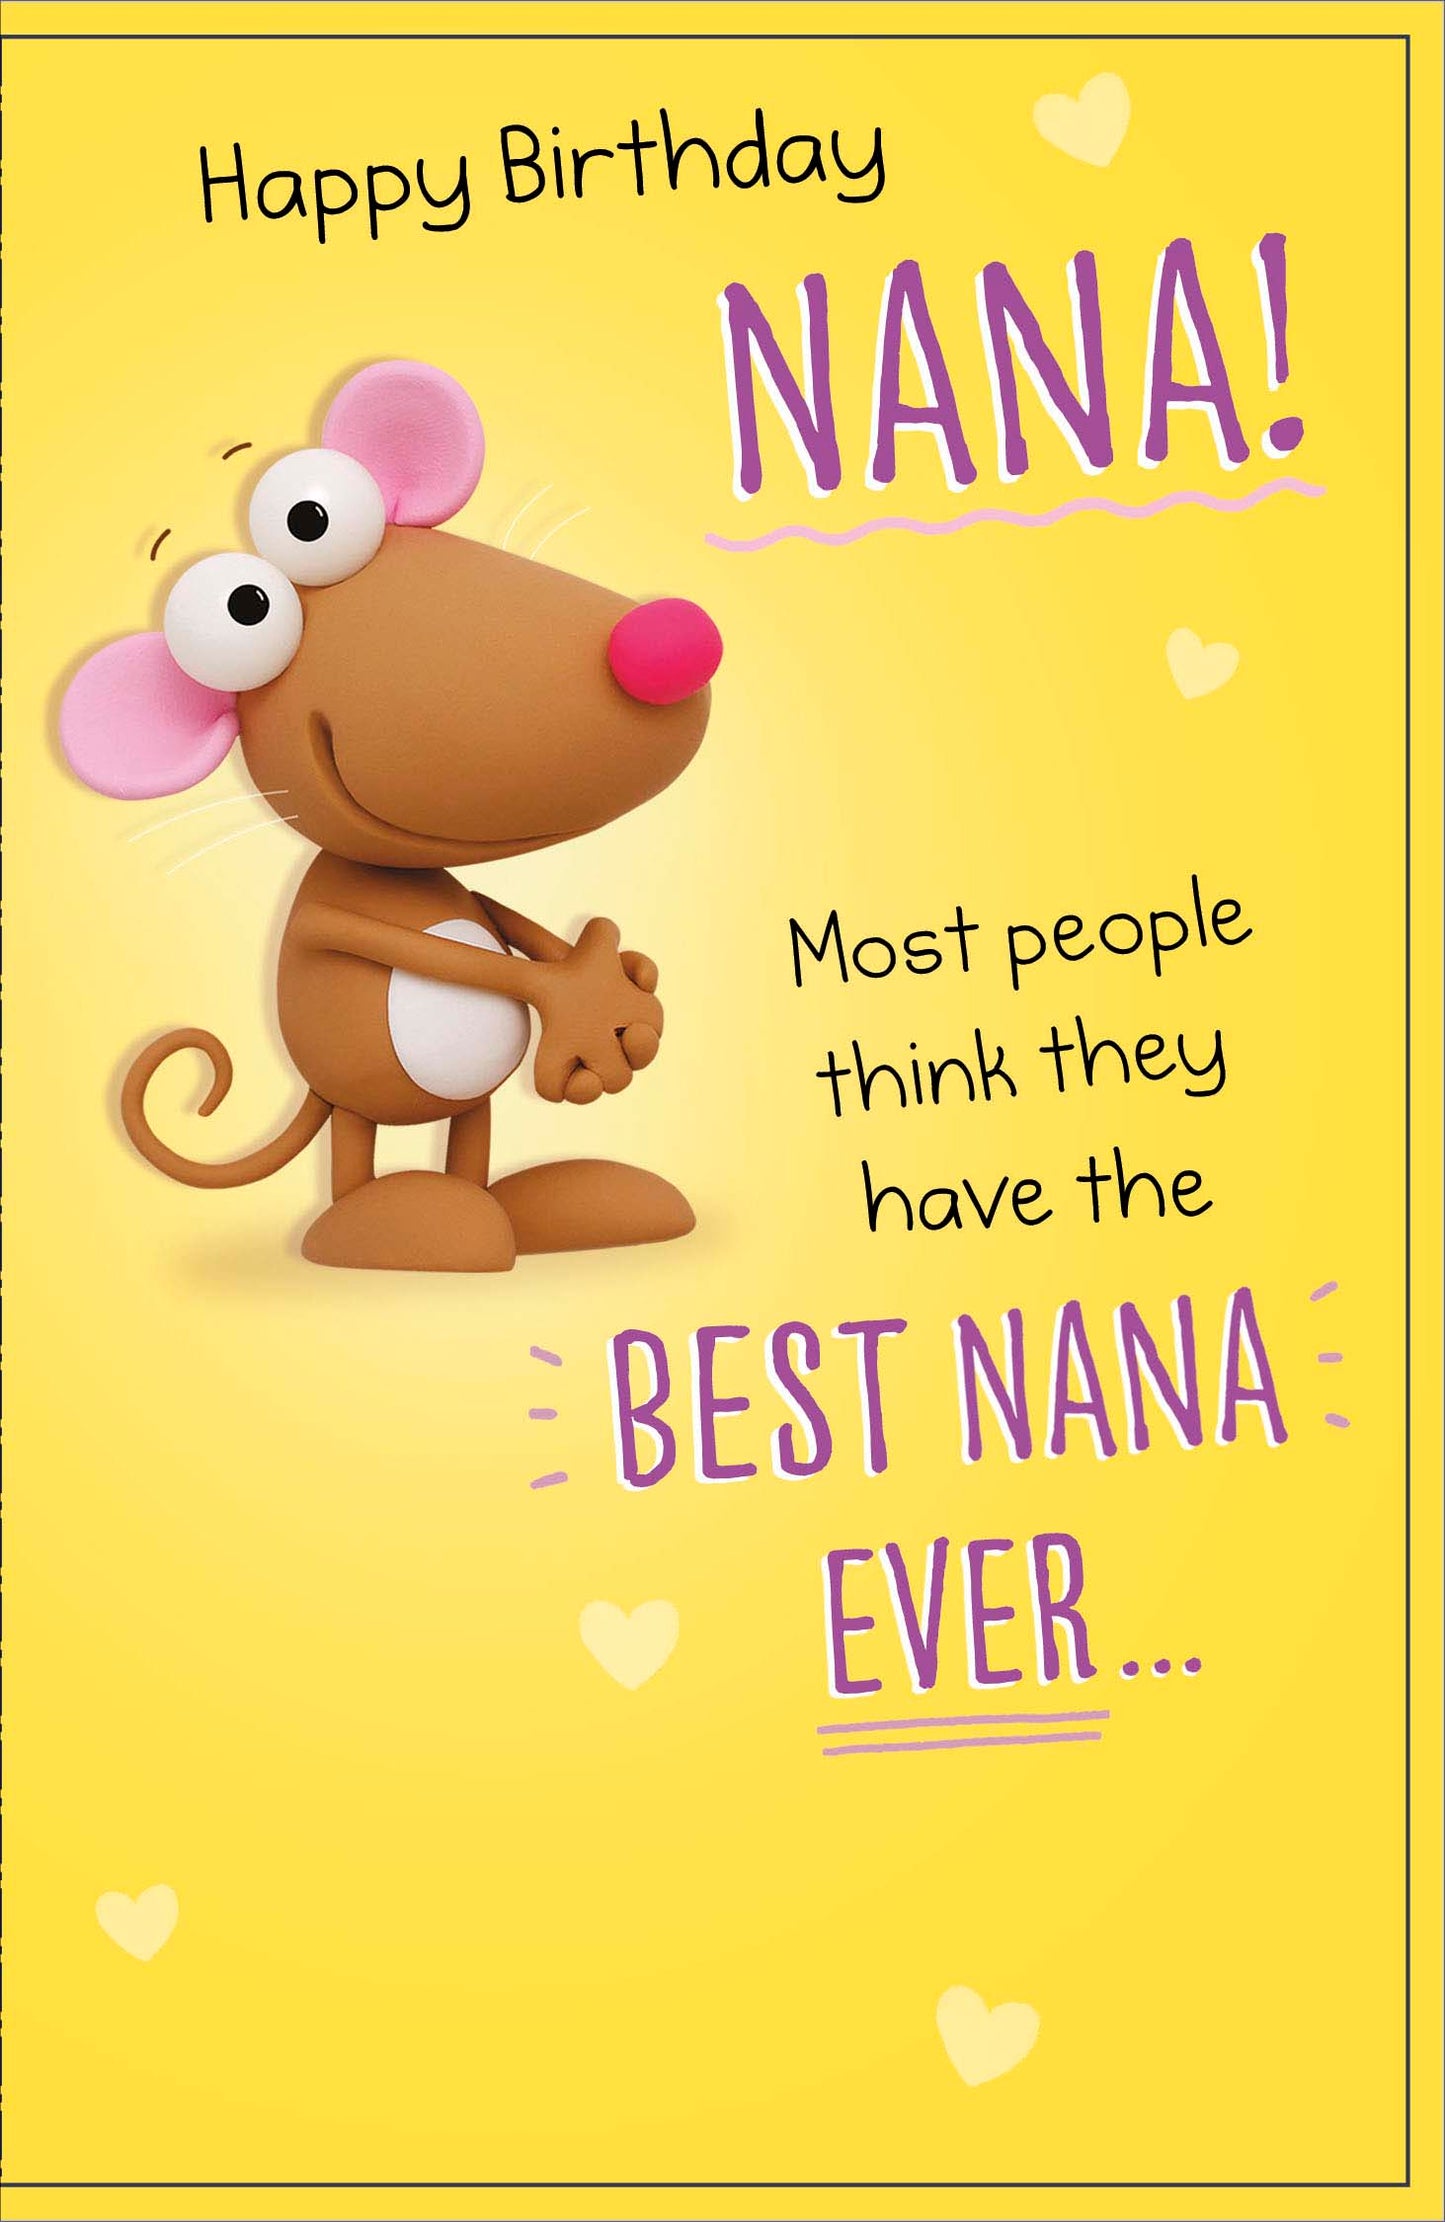 Nana Best Nana Ever Have A Lovely Day! Funny Greeting Card